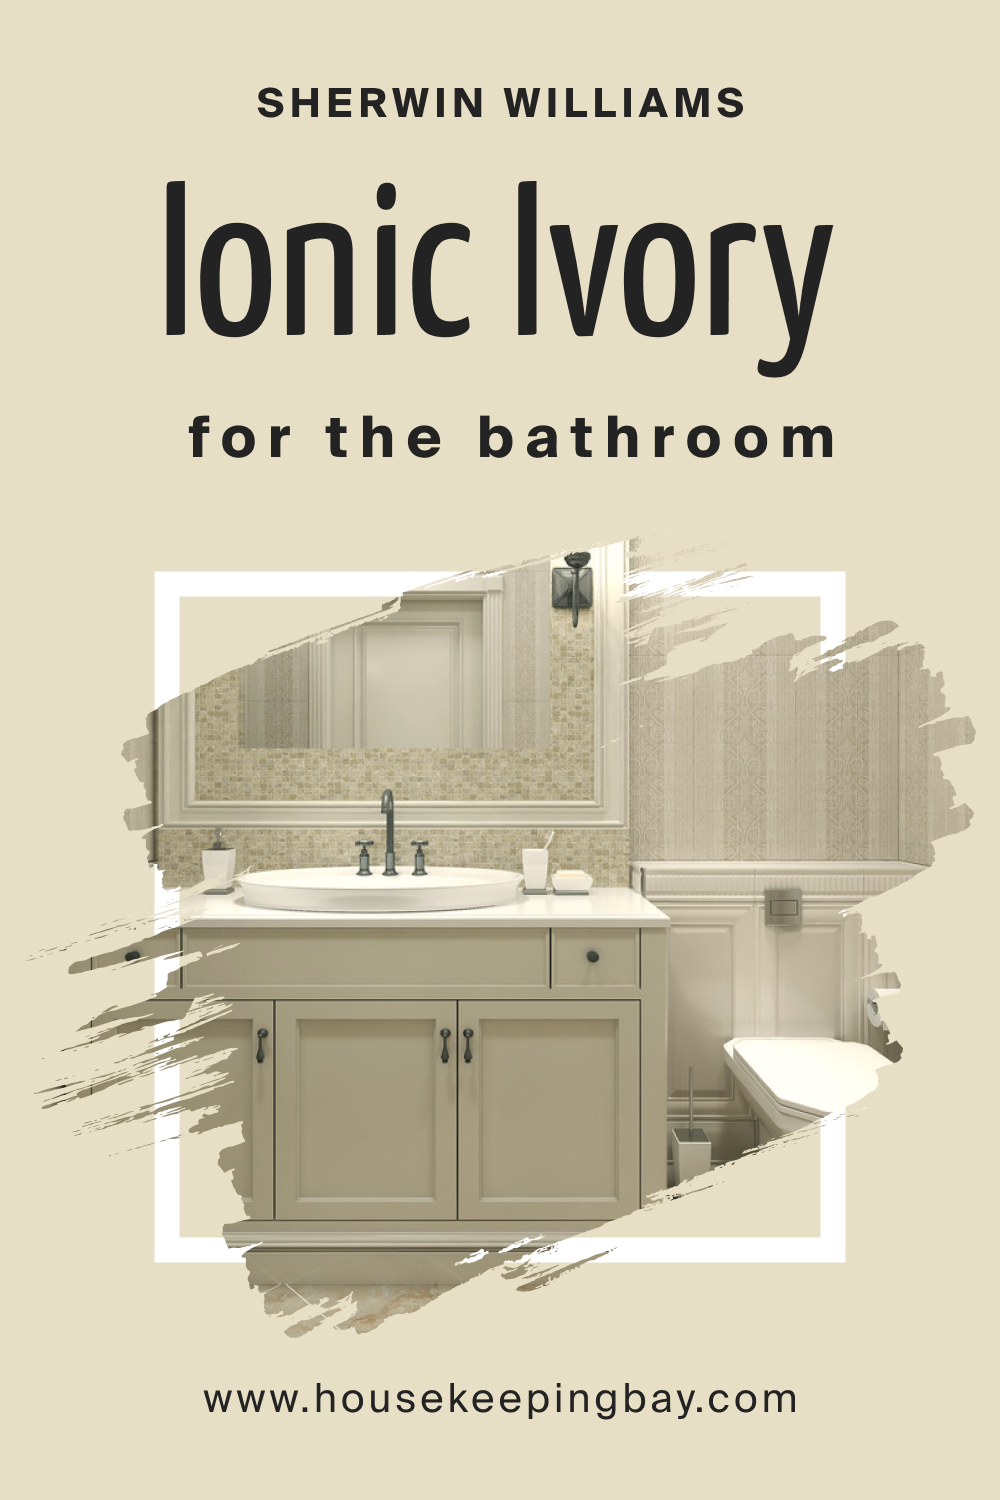 Sherwin Williams. SW 6406 Ionic Ivory For the Bathroom